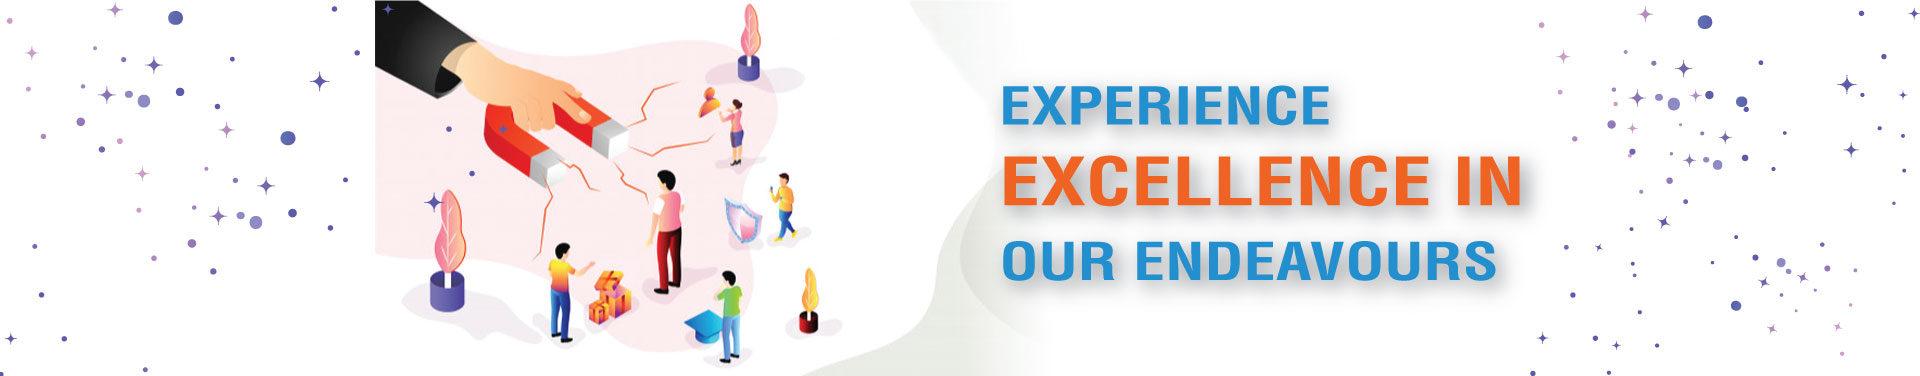 EXPERIENCE EXCELLENCE IN OUR ENDEAVOURS